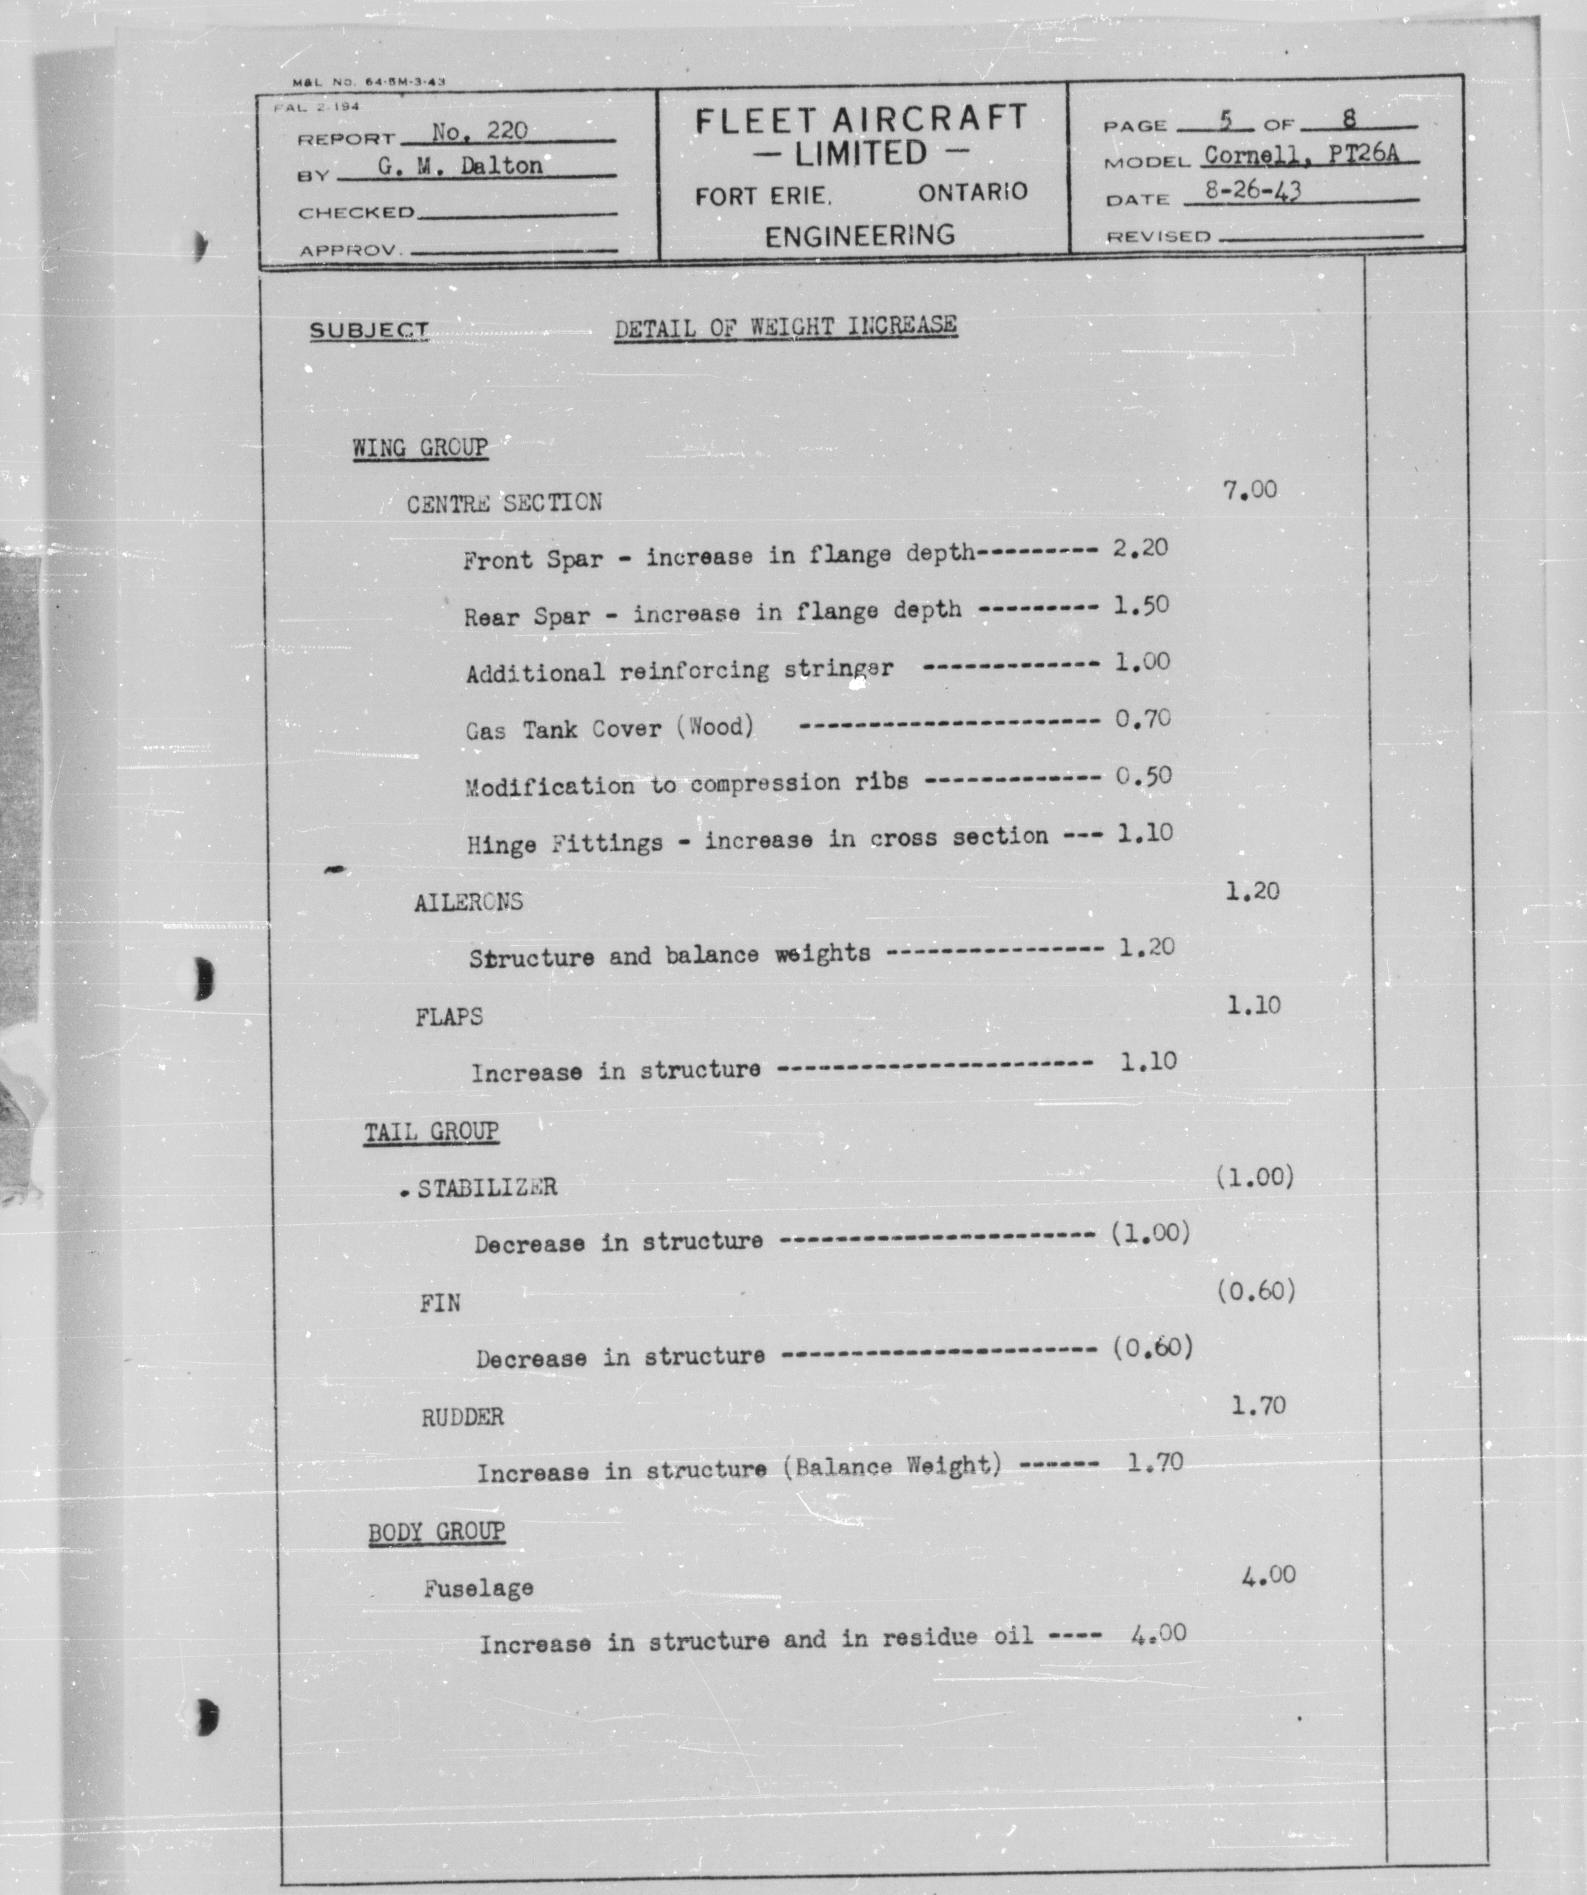 Sample page 5 from AirCorps Library document: Approved Tare Weight Modification for Cornell PT-26A